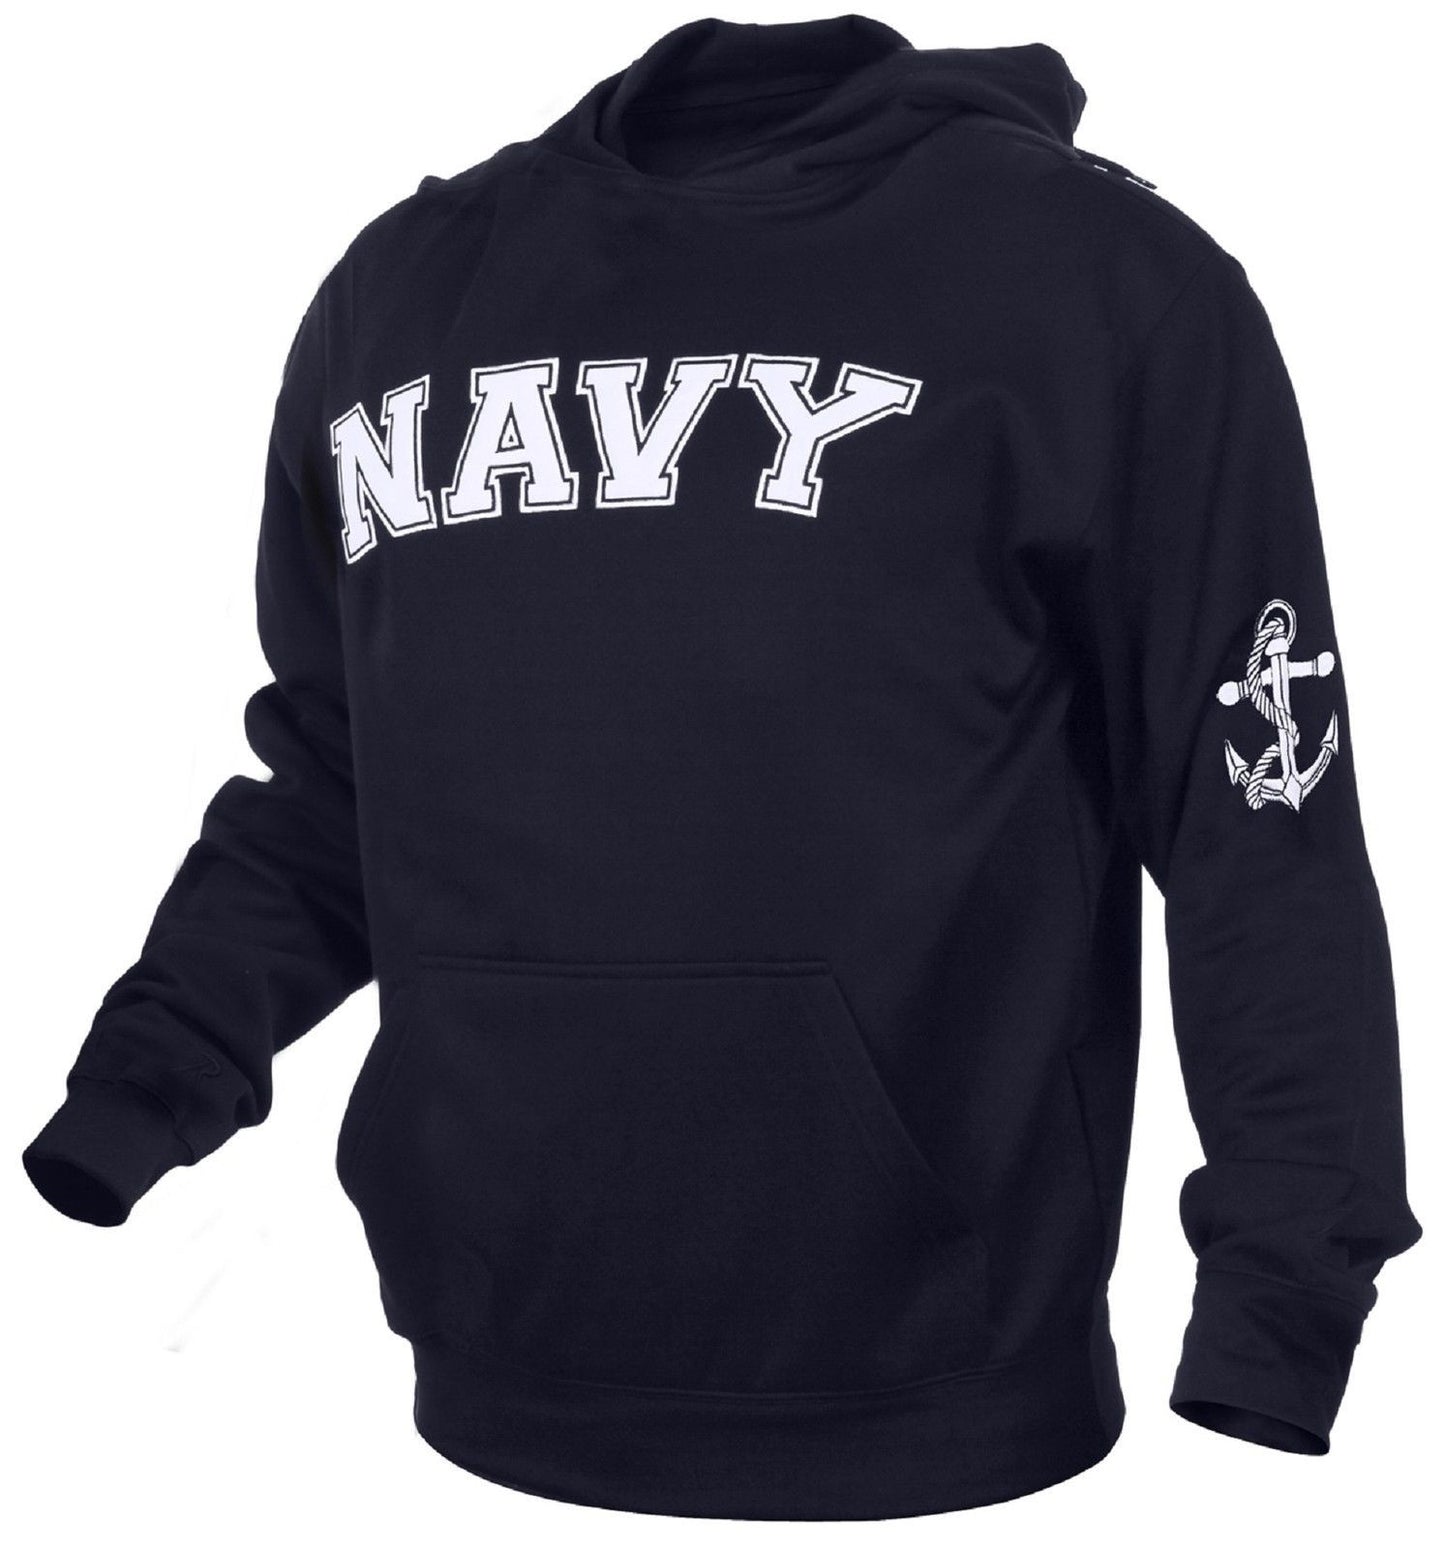 Rothco Embroidered NAVY Hooded Sweatshirt - Men's Pullover Hoodie